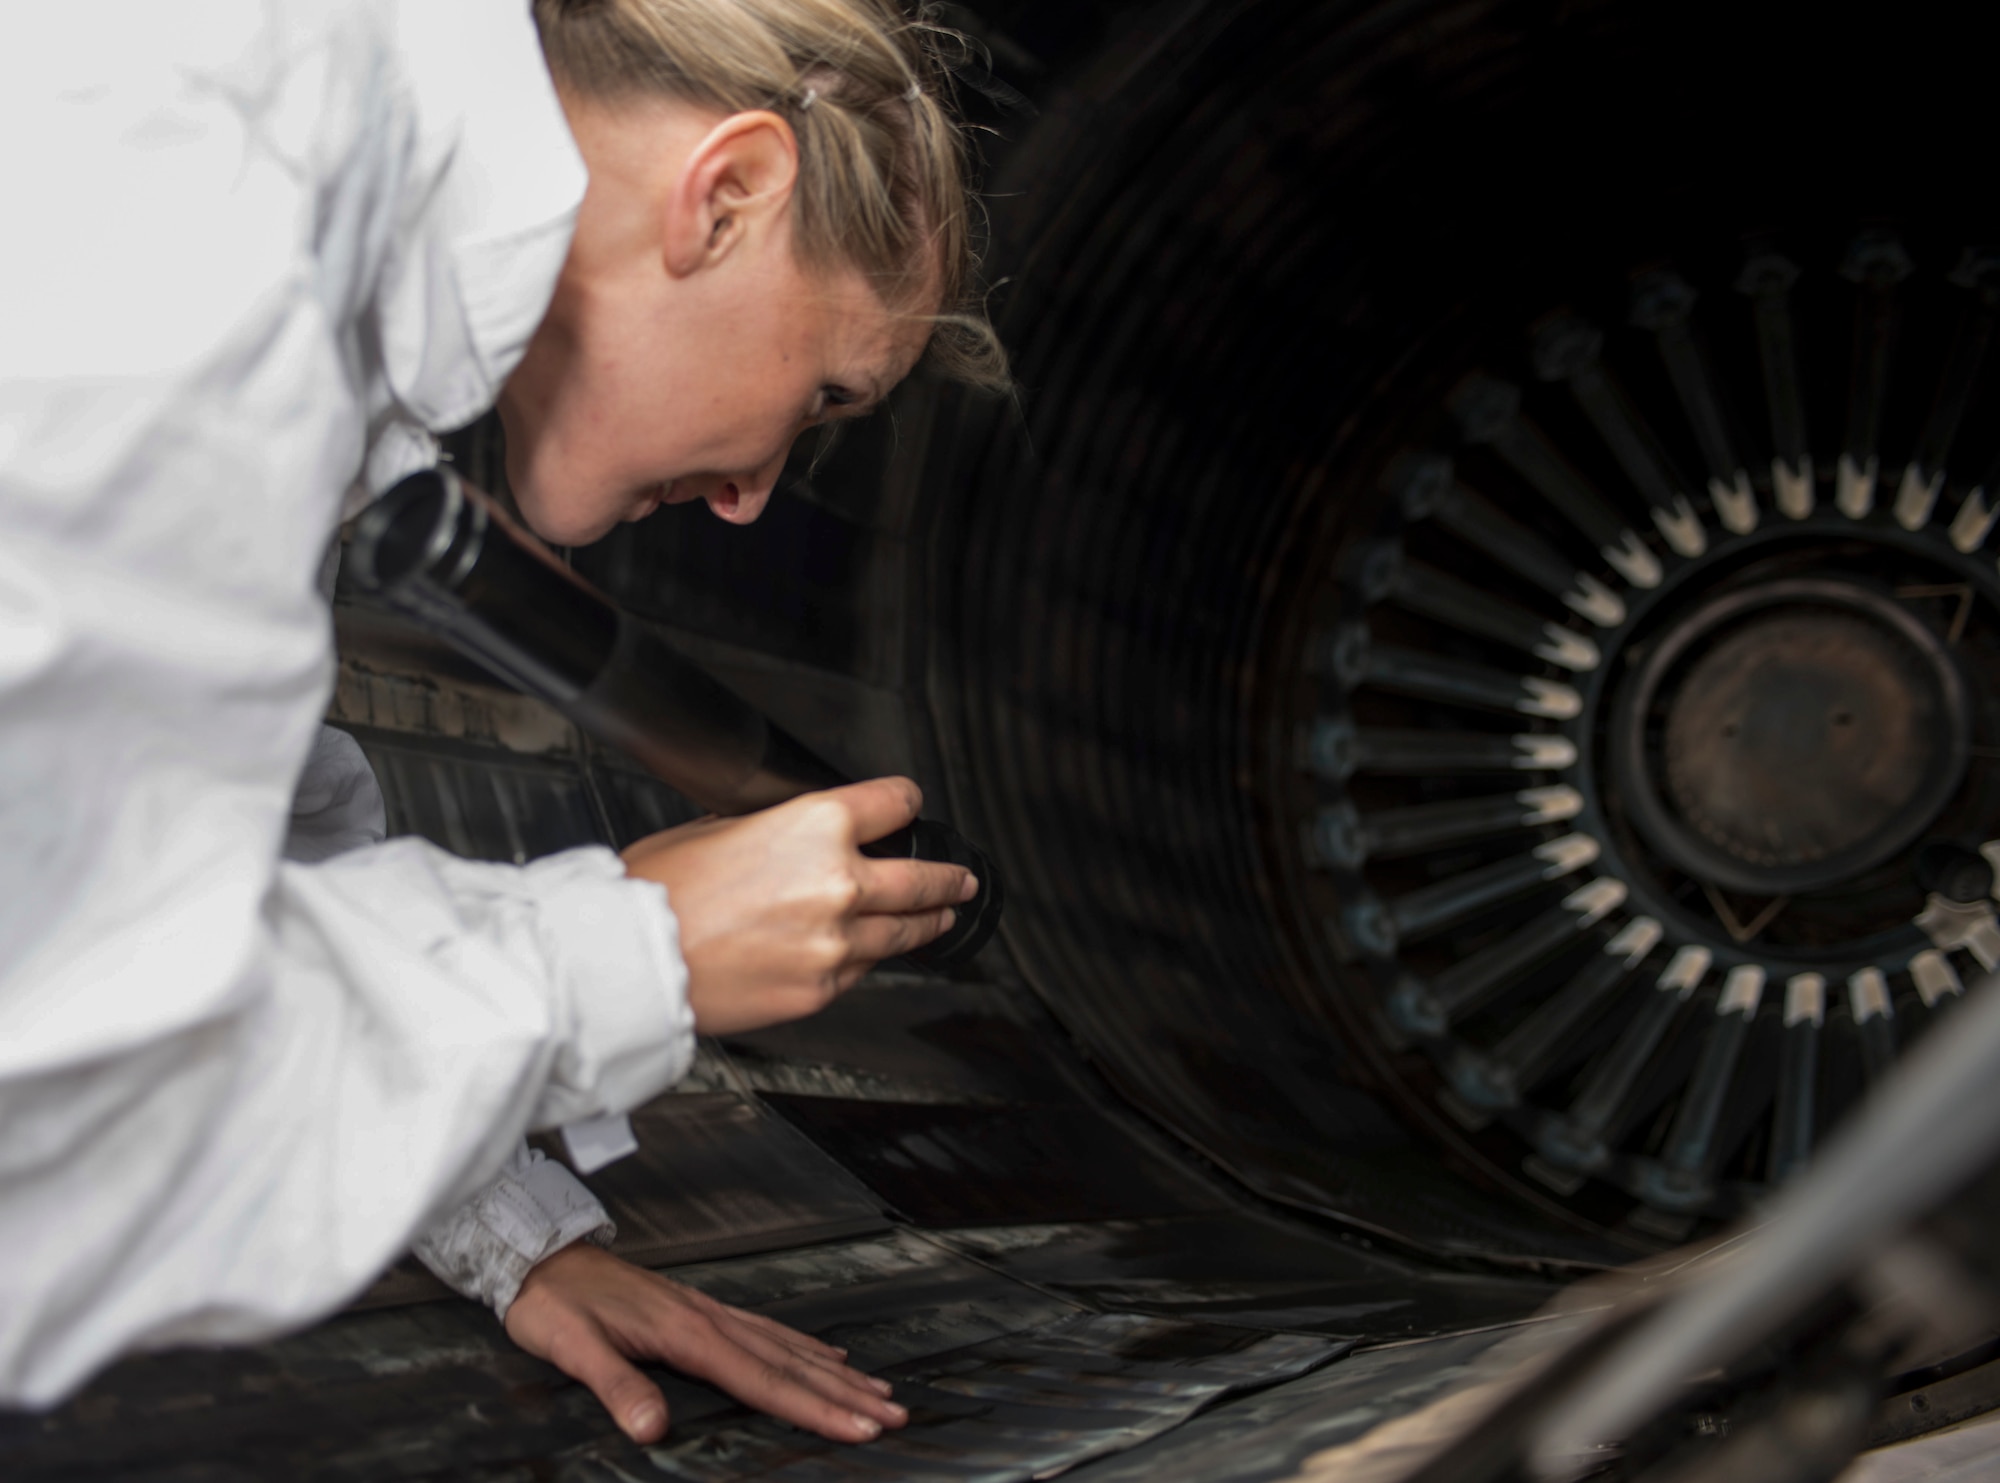 U.S. Air Force Tech. Sgt. Erin Rutherford, 28th Aircraft Maintenance Squadron aerospace propulsion noncommissioned officer in-charge, conducts post flight inspections of a B-1B Lancer from Ellsworth Air Force Base, S.D., at Royal Air Force Base, U.K., June 7, 2017. The U.S. Air Force participates in annual joint and multinational exercises as a visible demonstration to U.S.  commitment to regional security and stability anytime, anywhere. (U.S. Air Force photo by Airman 1st Class Randahl J. Jenson)        